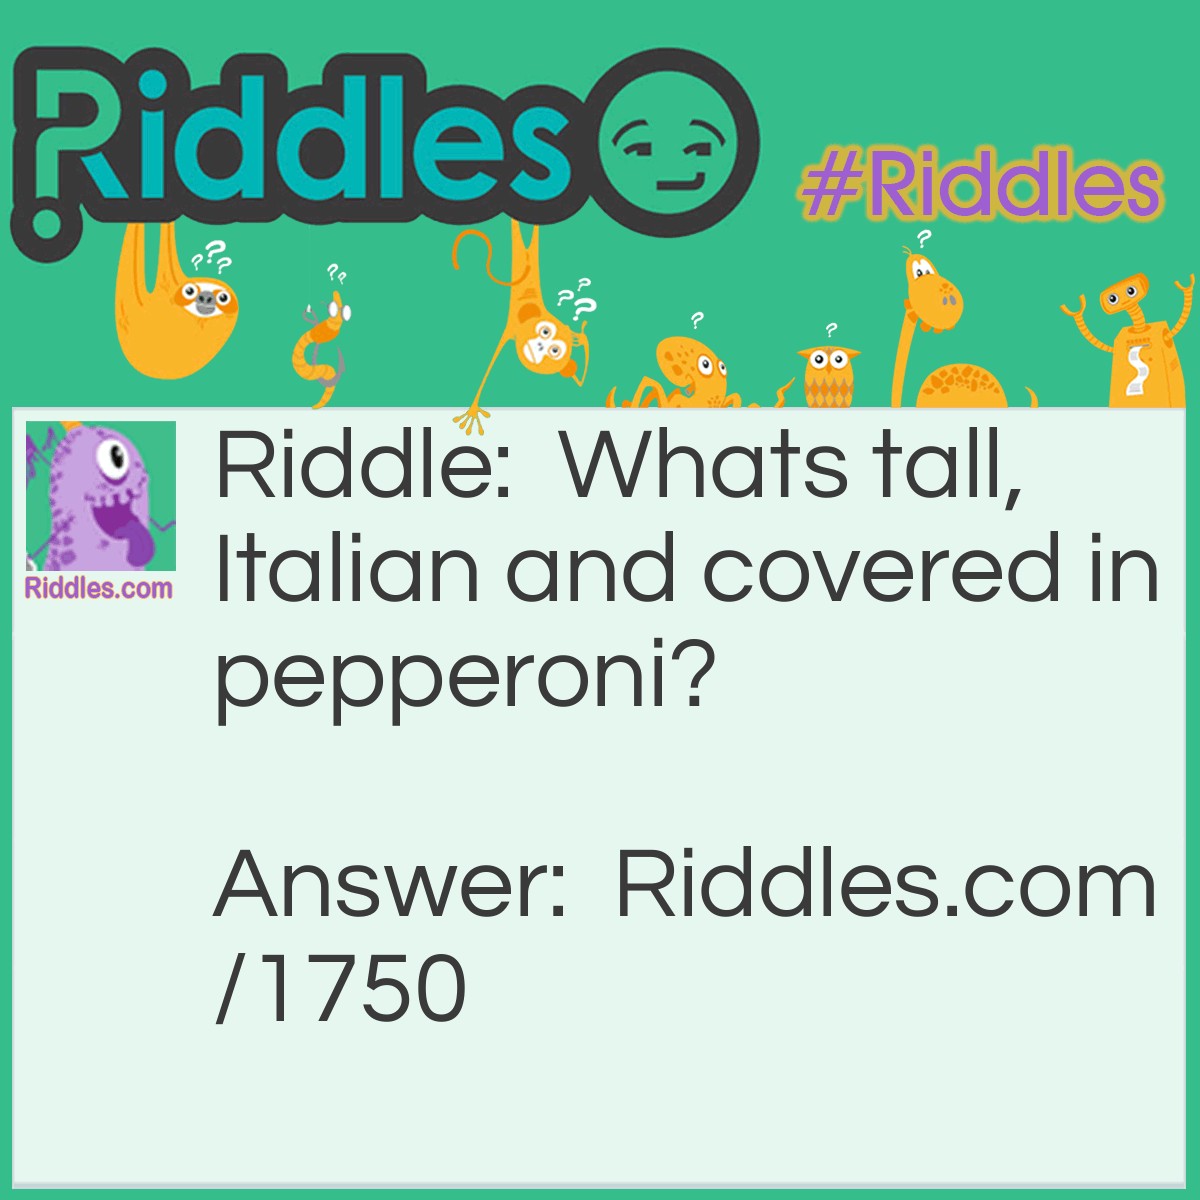 Riddle: Whats tall, Italian and covered in pepperoni? Answer: The leaning tower of Pizza.